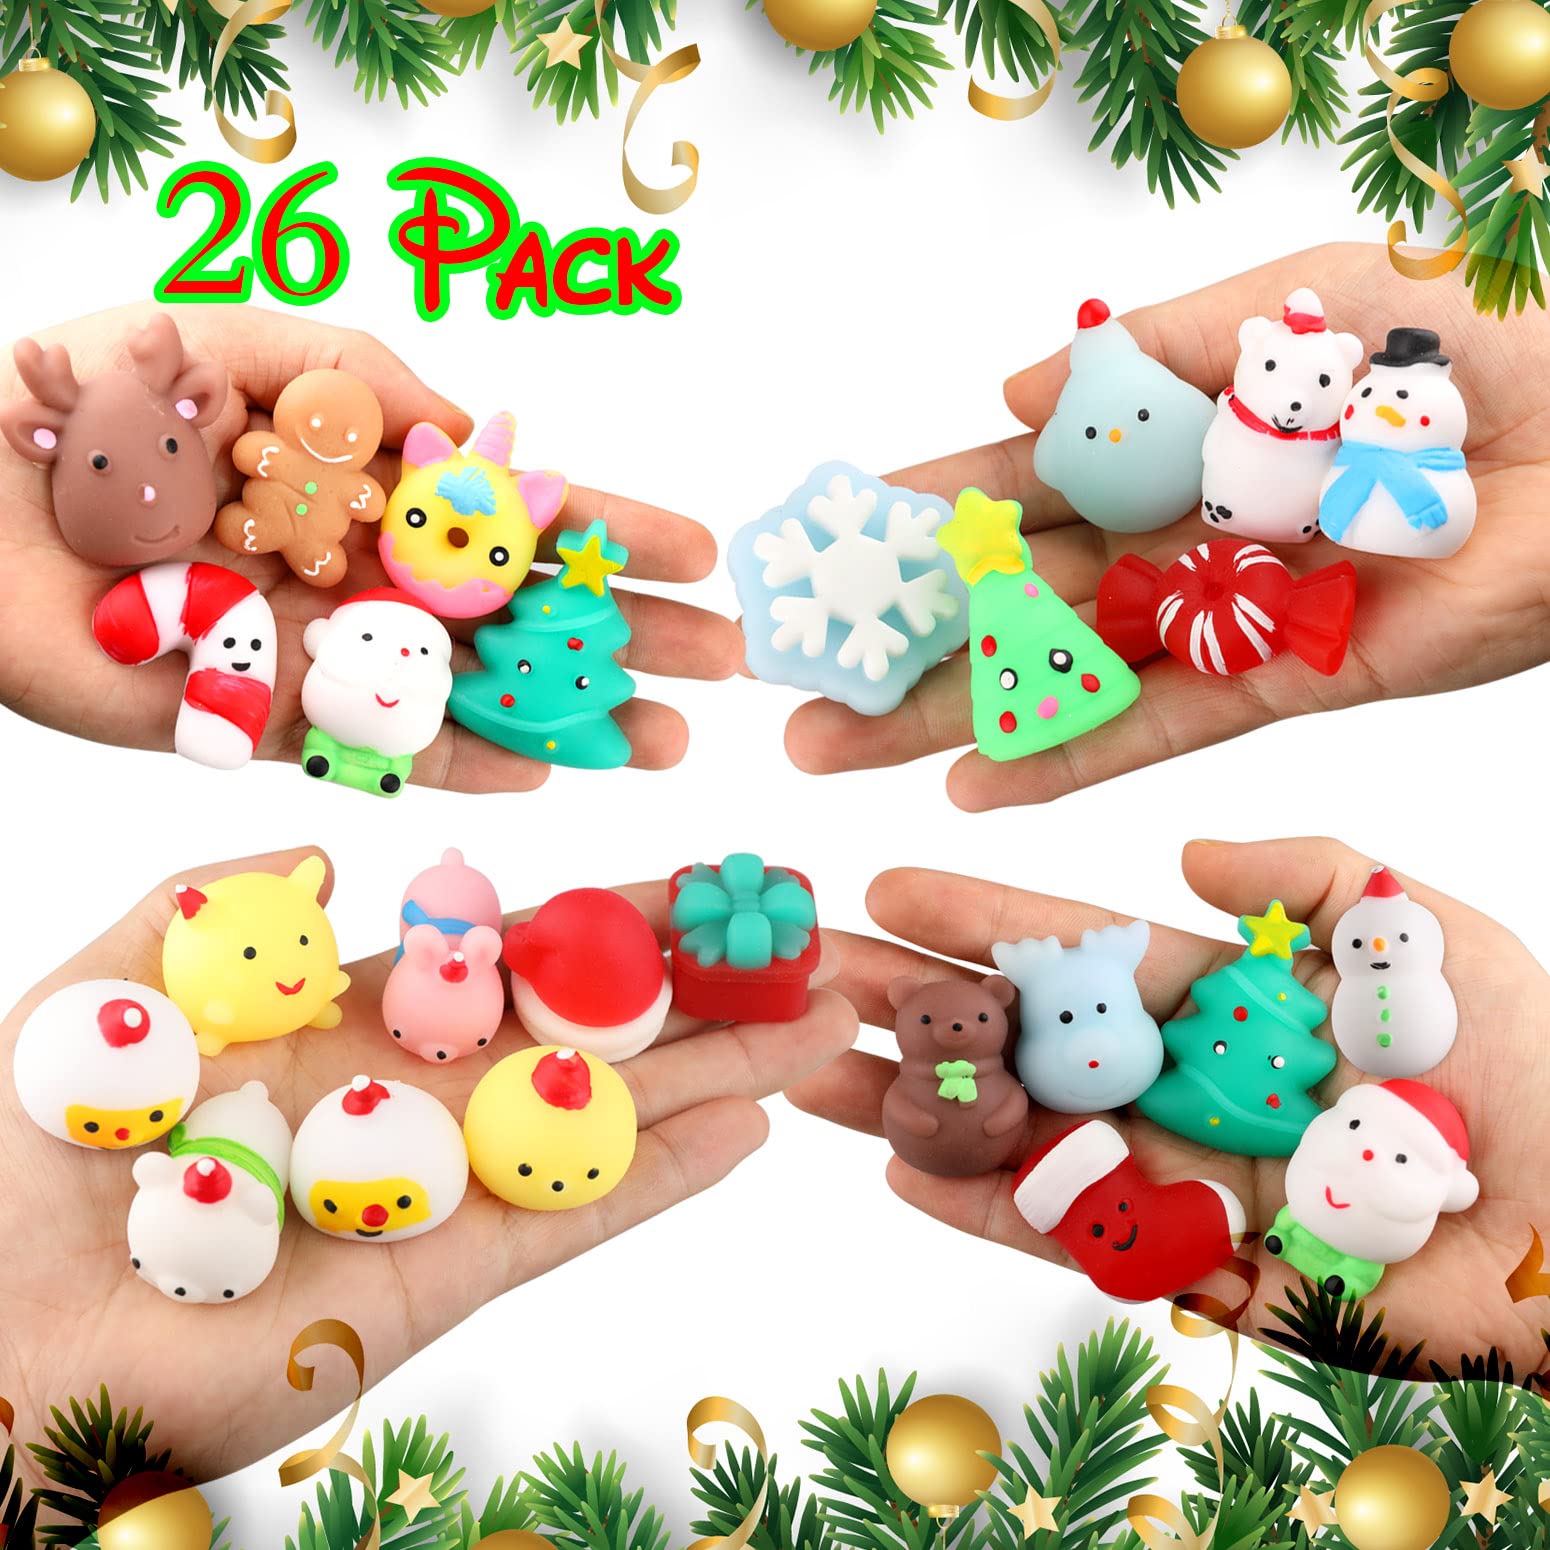 Squishies, Mochi Squishy Toys - Christmas Kawaii Cat Squishys Slow Rising Animals - Party Favors, Goodie Bag, Birthday Gifts, Mini Squishies Stress Reliever Toy Pack